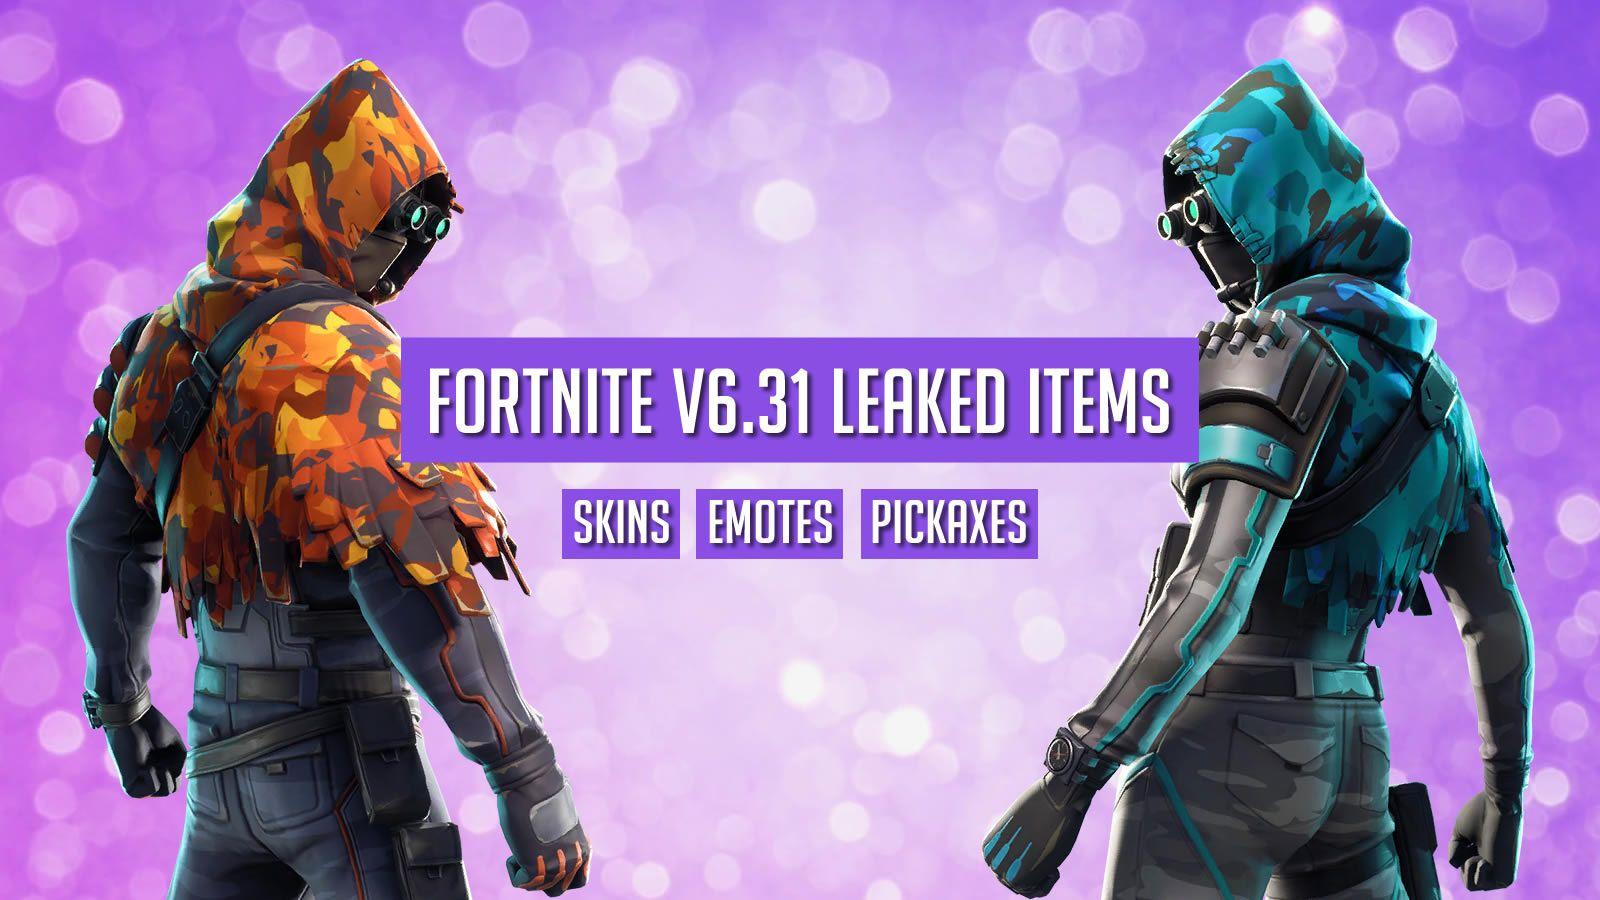 Fortnite v6.31 Items Leaked, Emotes, Pickaxes and More